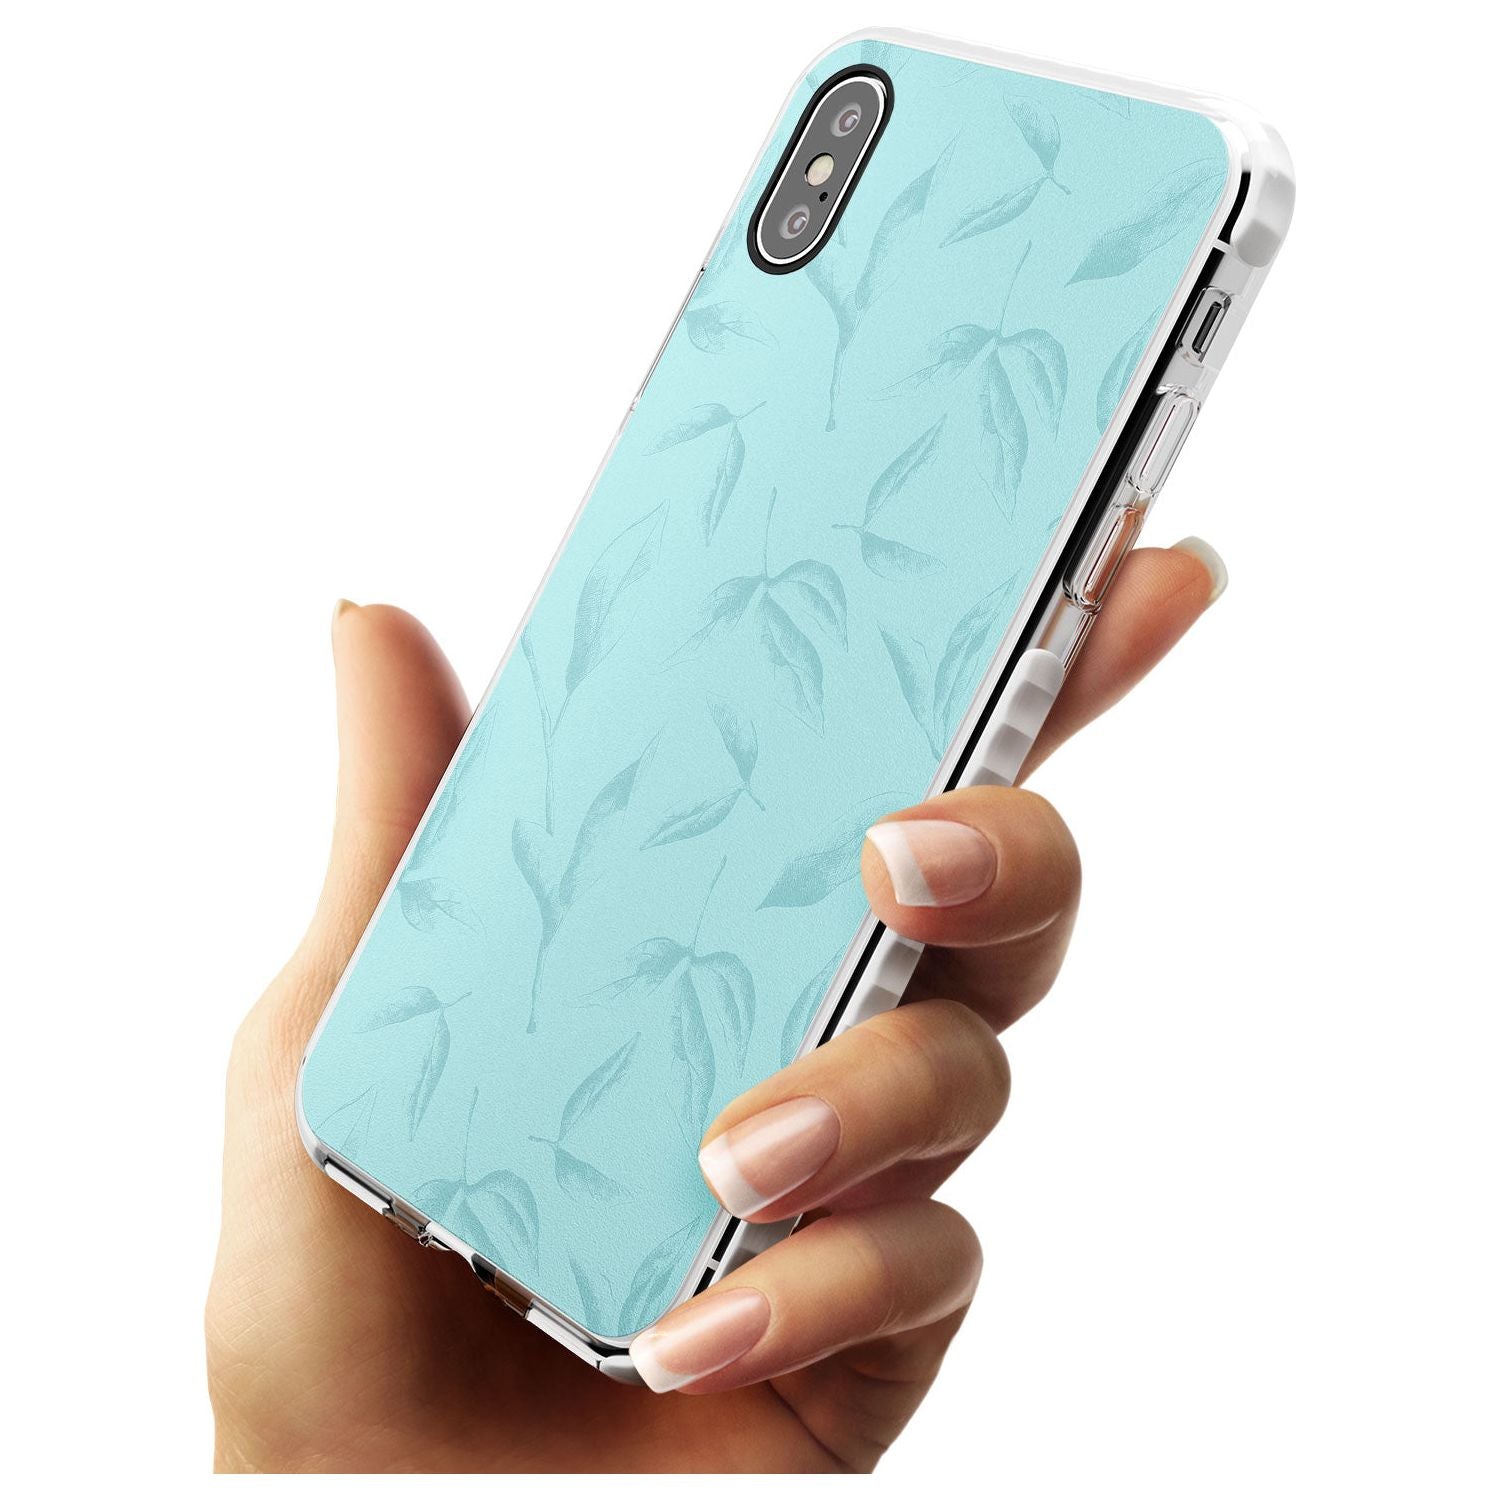 Blue Leaves Vintage Botanical Impact Phone Case for iPhone X XS Max XR